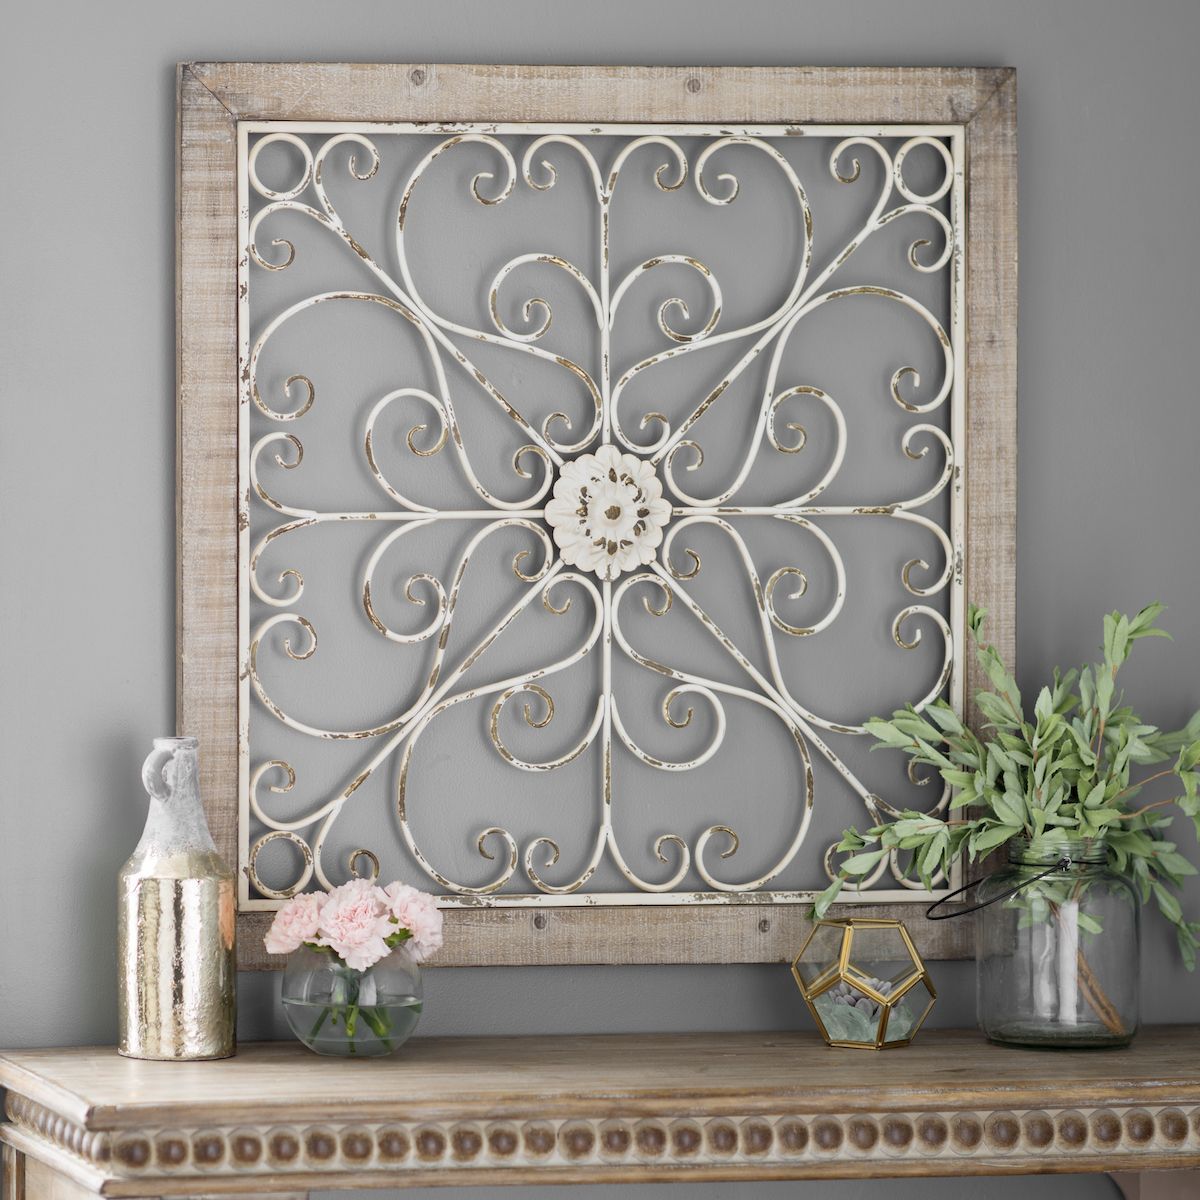 Scroll Framed Wall Decor Regarding Best And Newest Product Details Daphne Ornate Scroll Wood And Metal Wall Plaque (View 15 of 20)